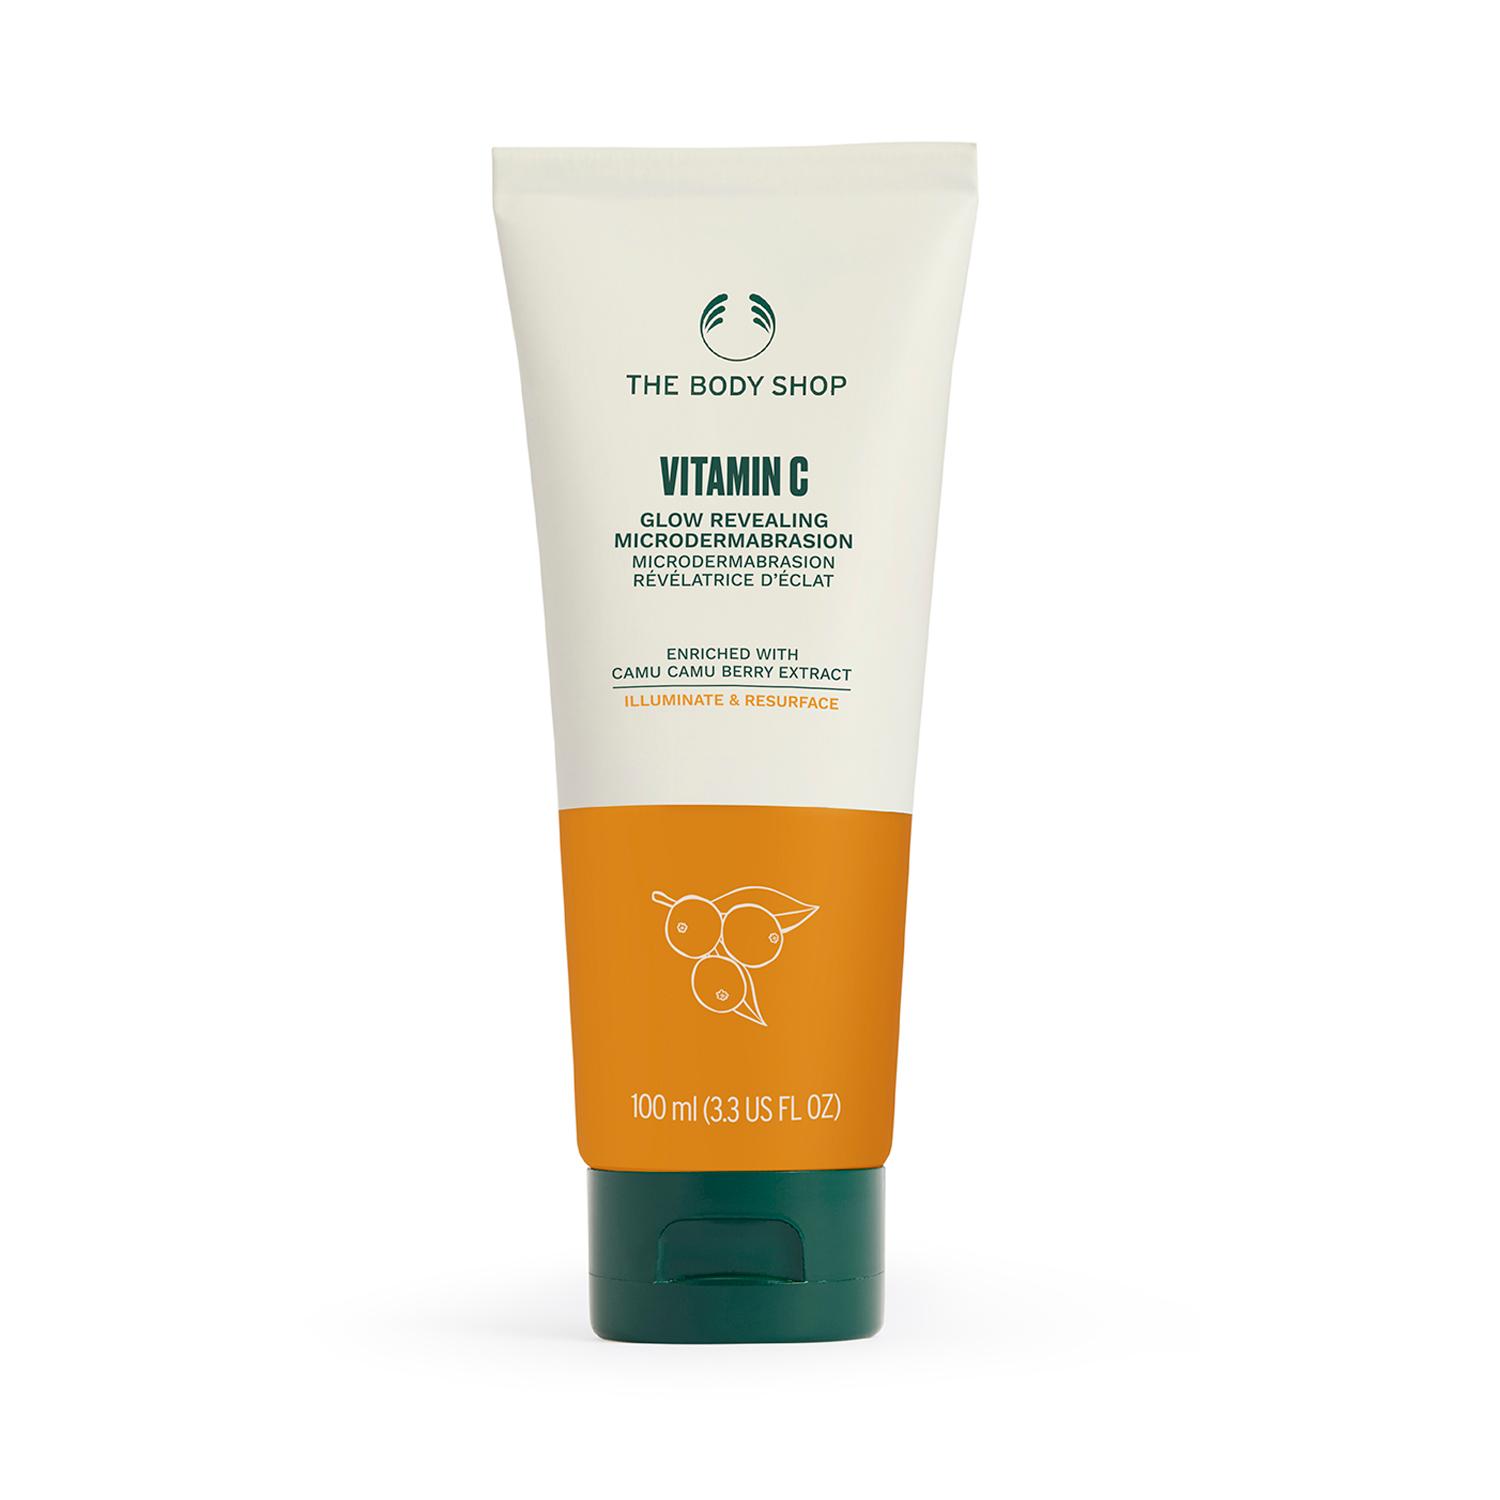 The Body Shop | The Body Shop Vitamin C Microdermabrasion (100 ml)